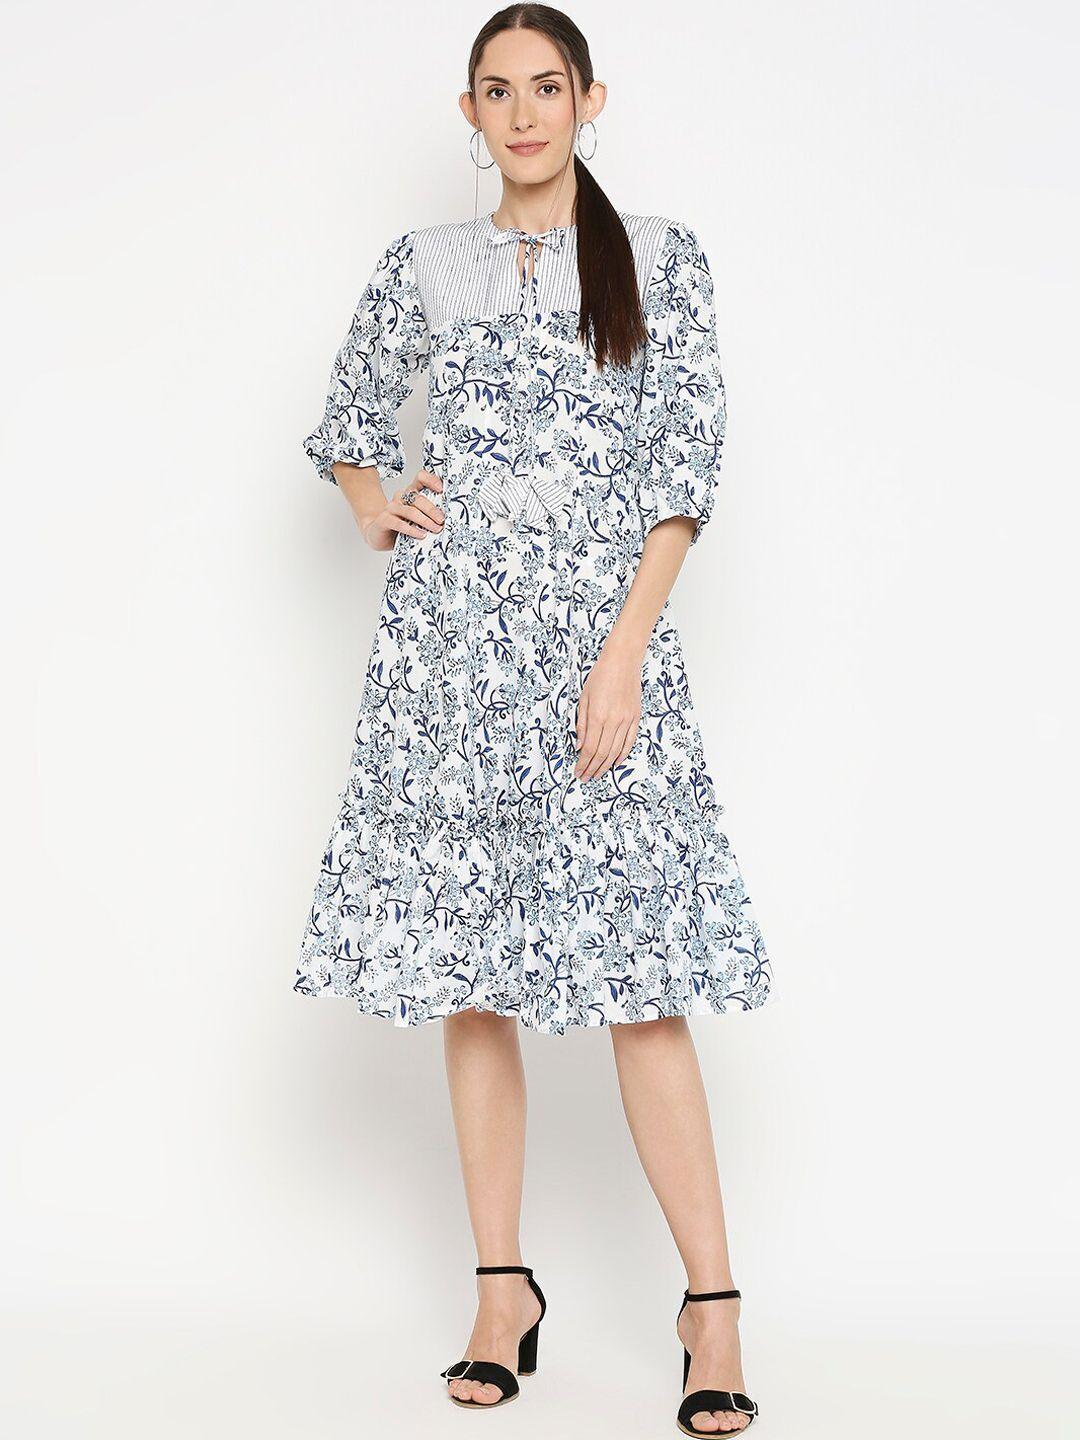 monk & mei women white & blue floral printed sustainable a-line dress